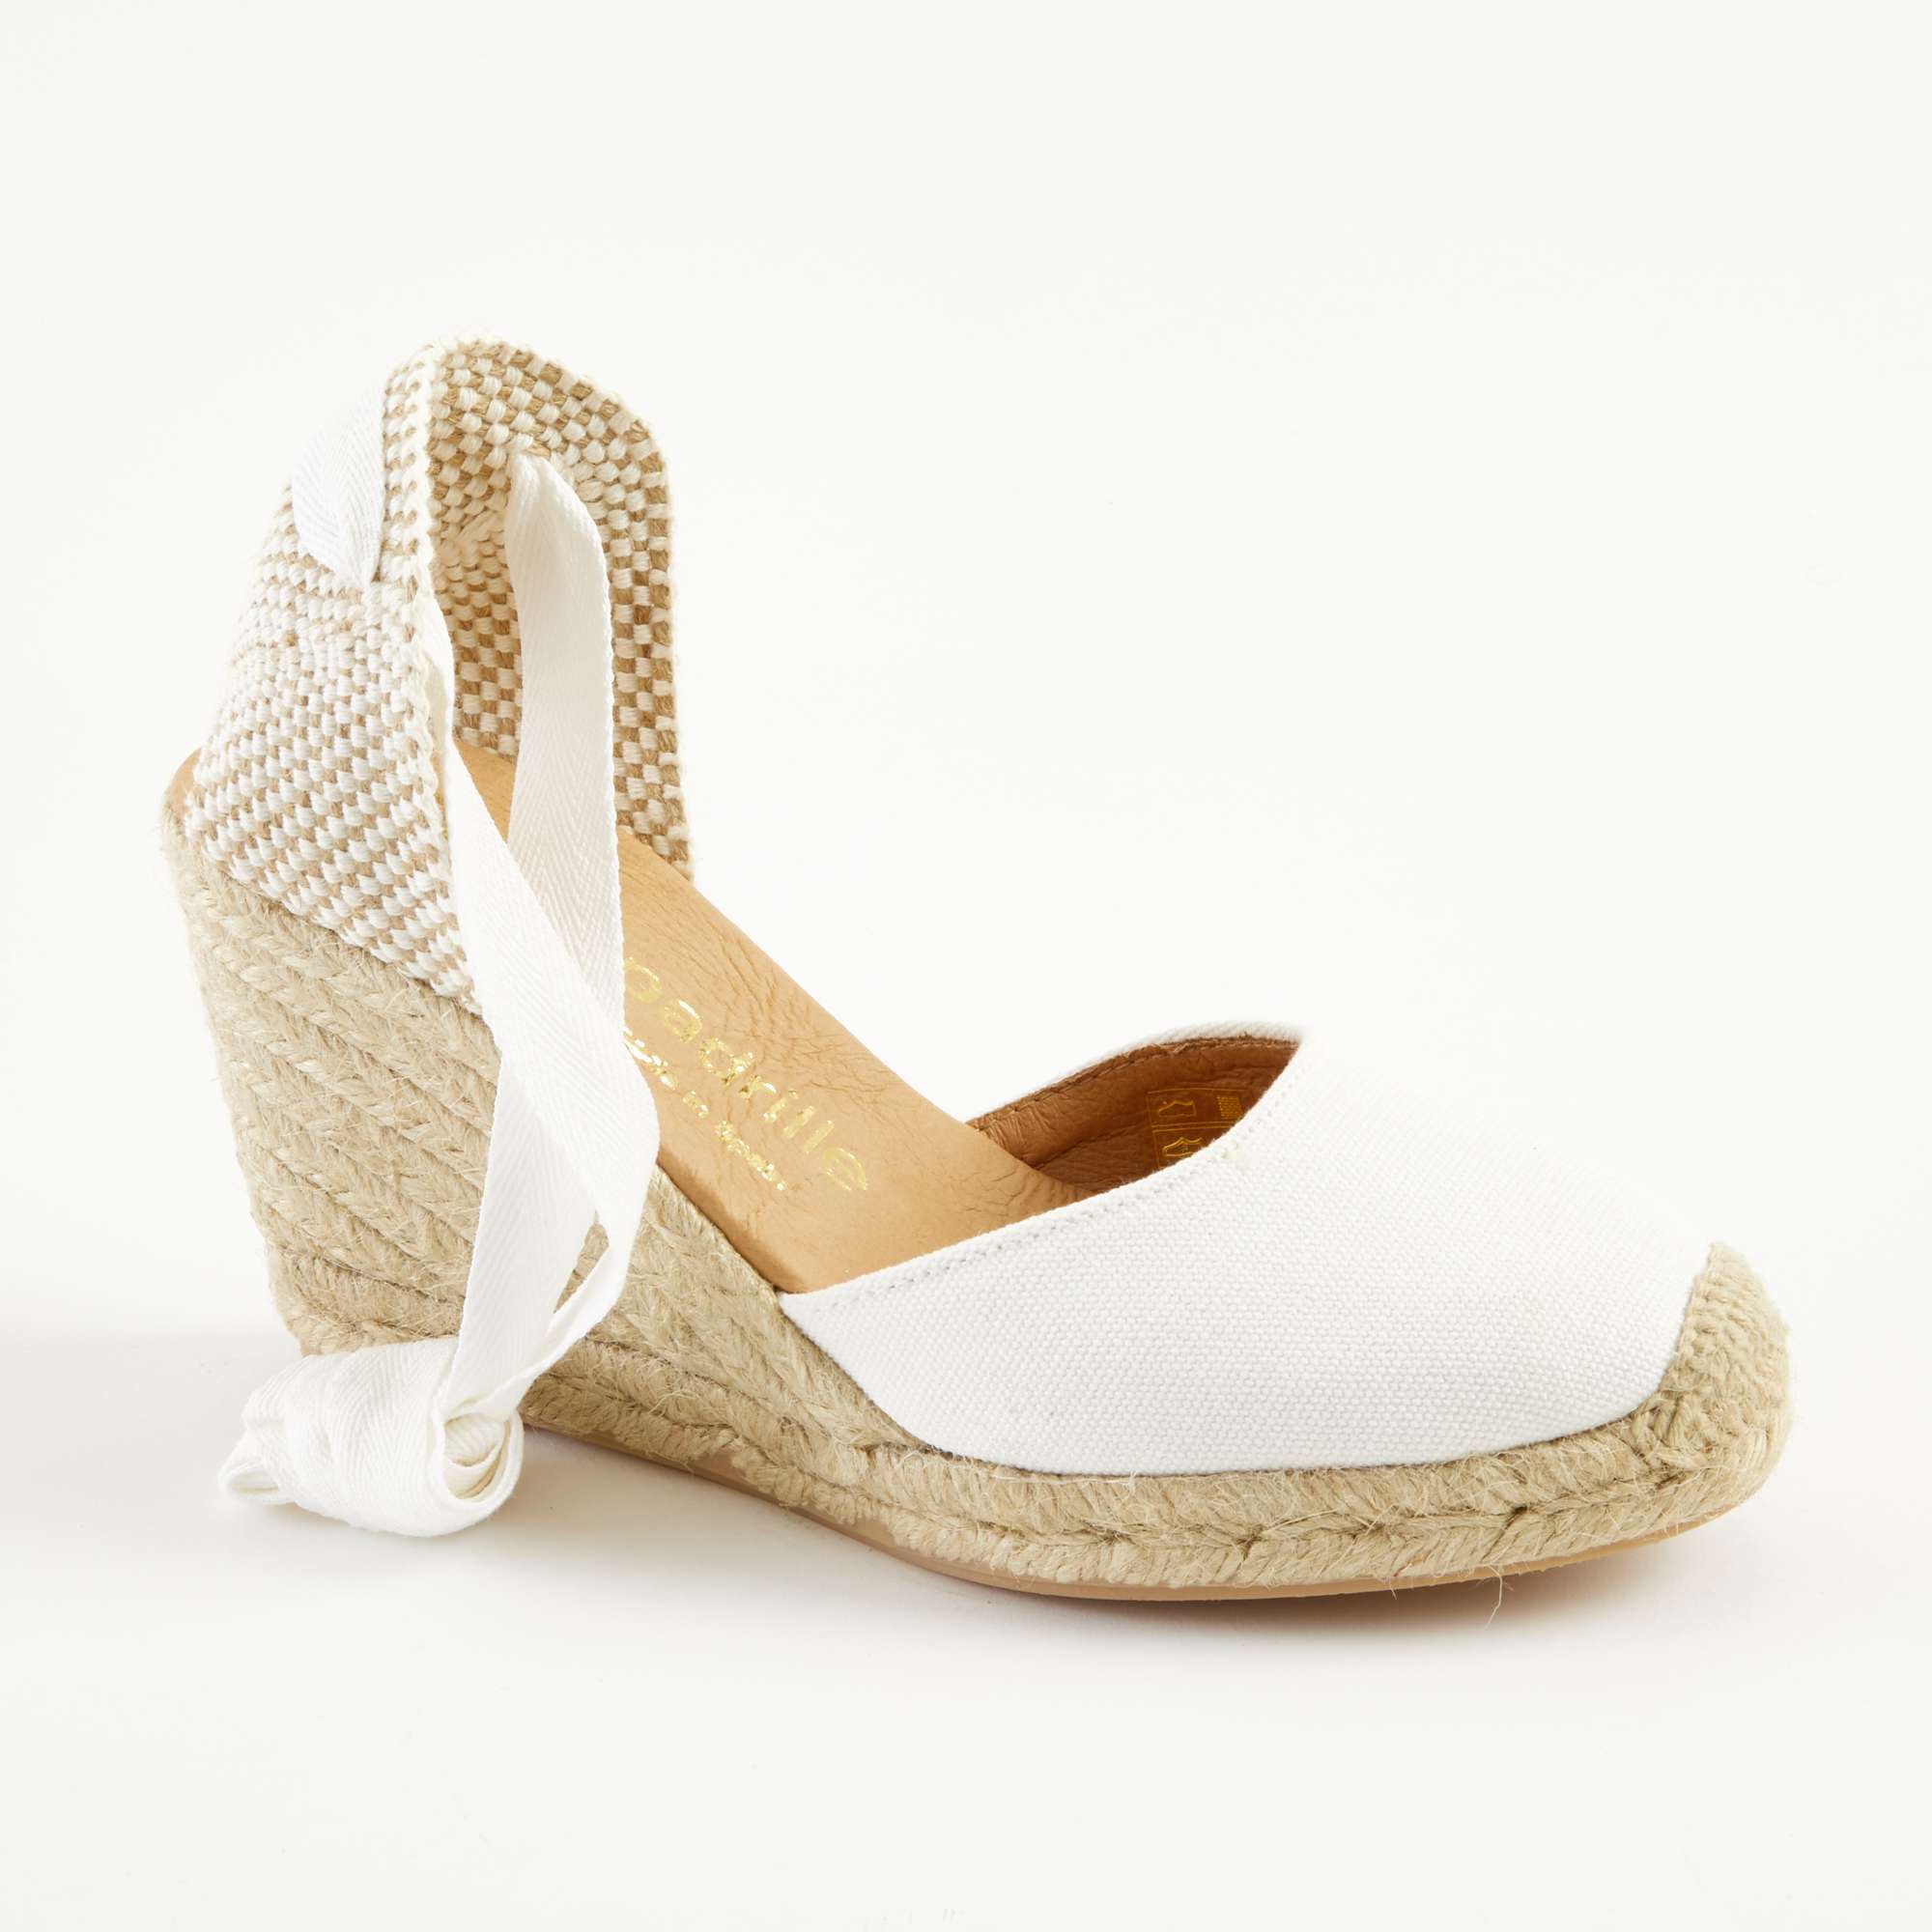 Frost Canvas Lace Up Espadrilles High Wedge espadrille.co .uk